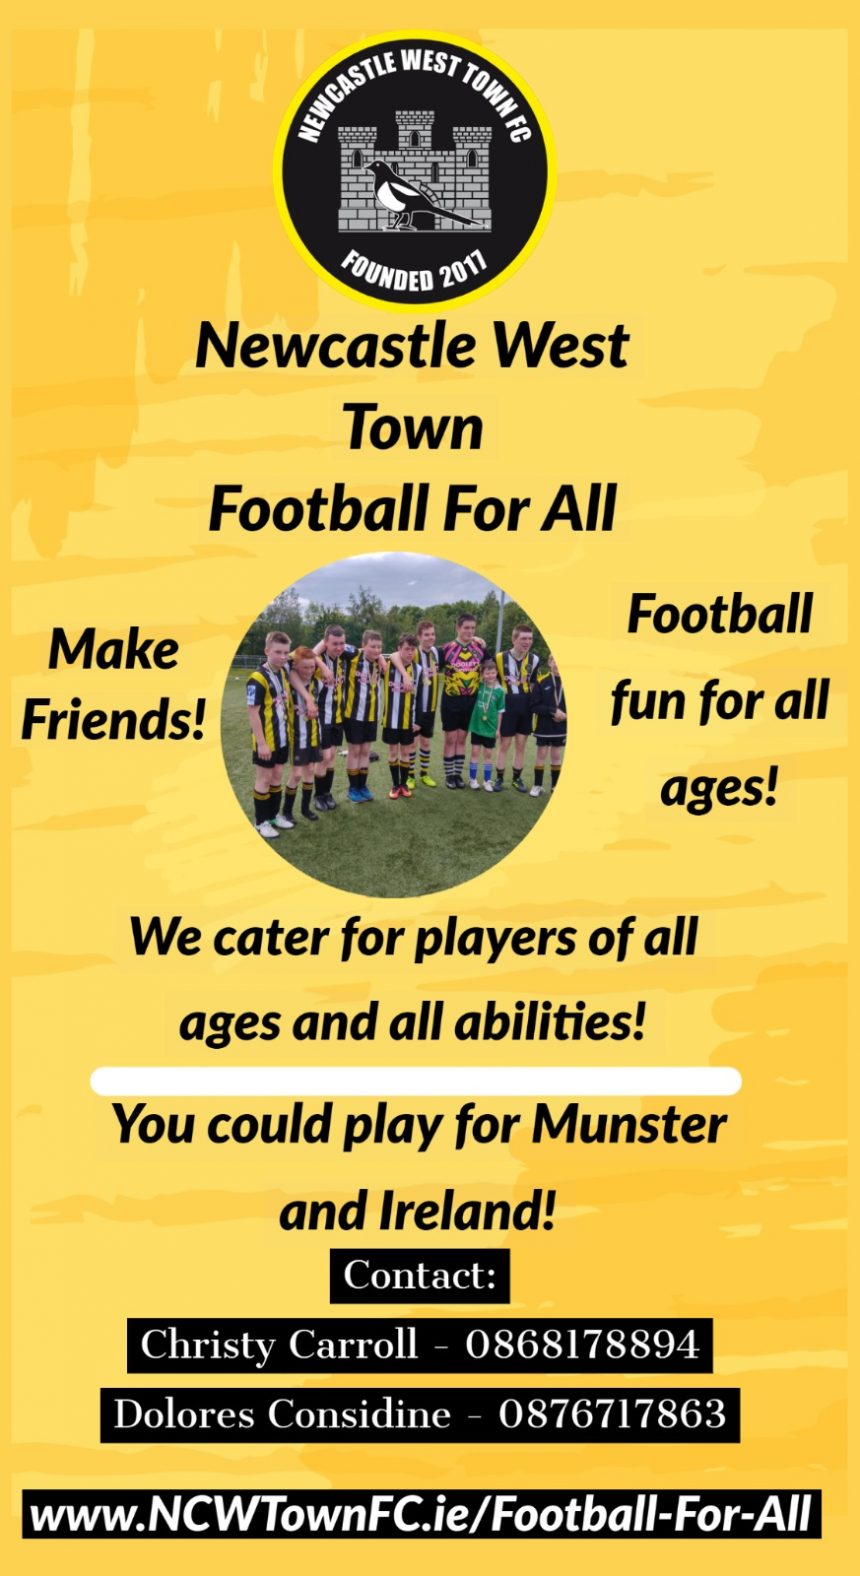 Football for All in Newcastle West